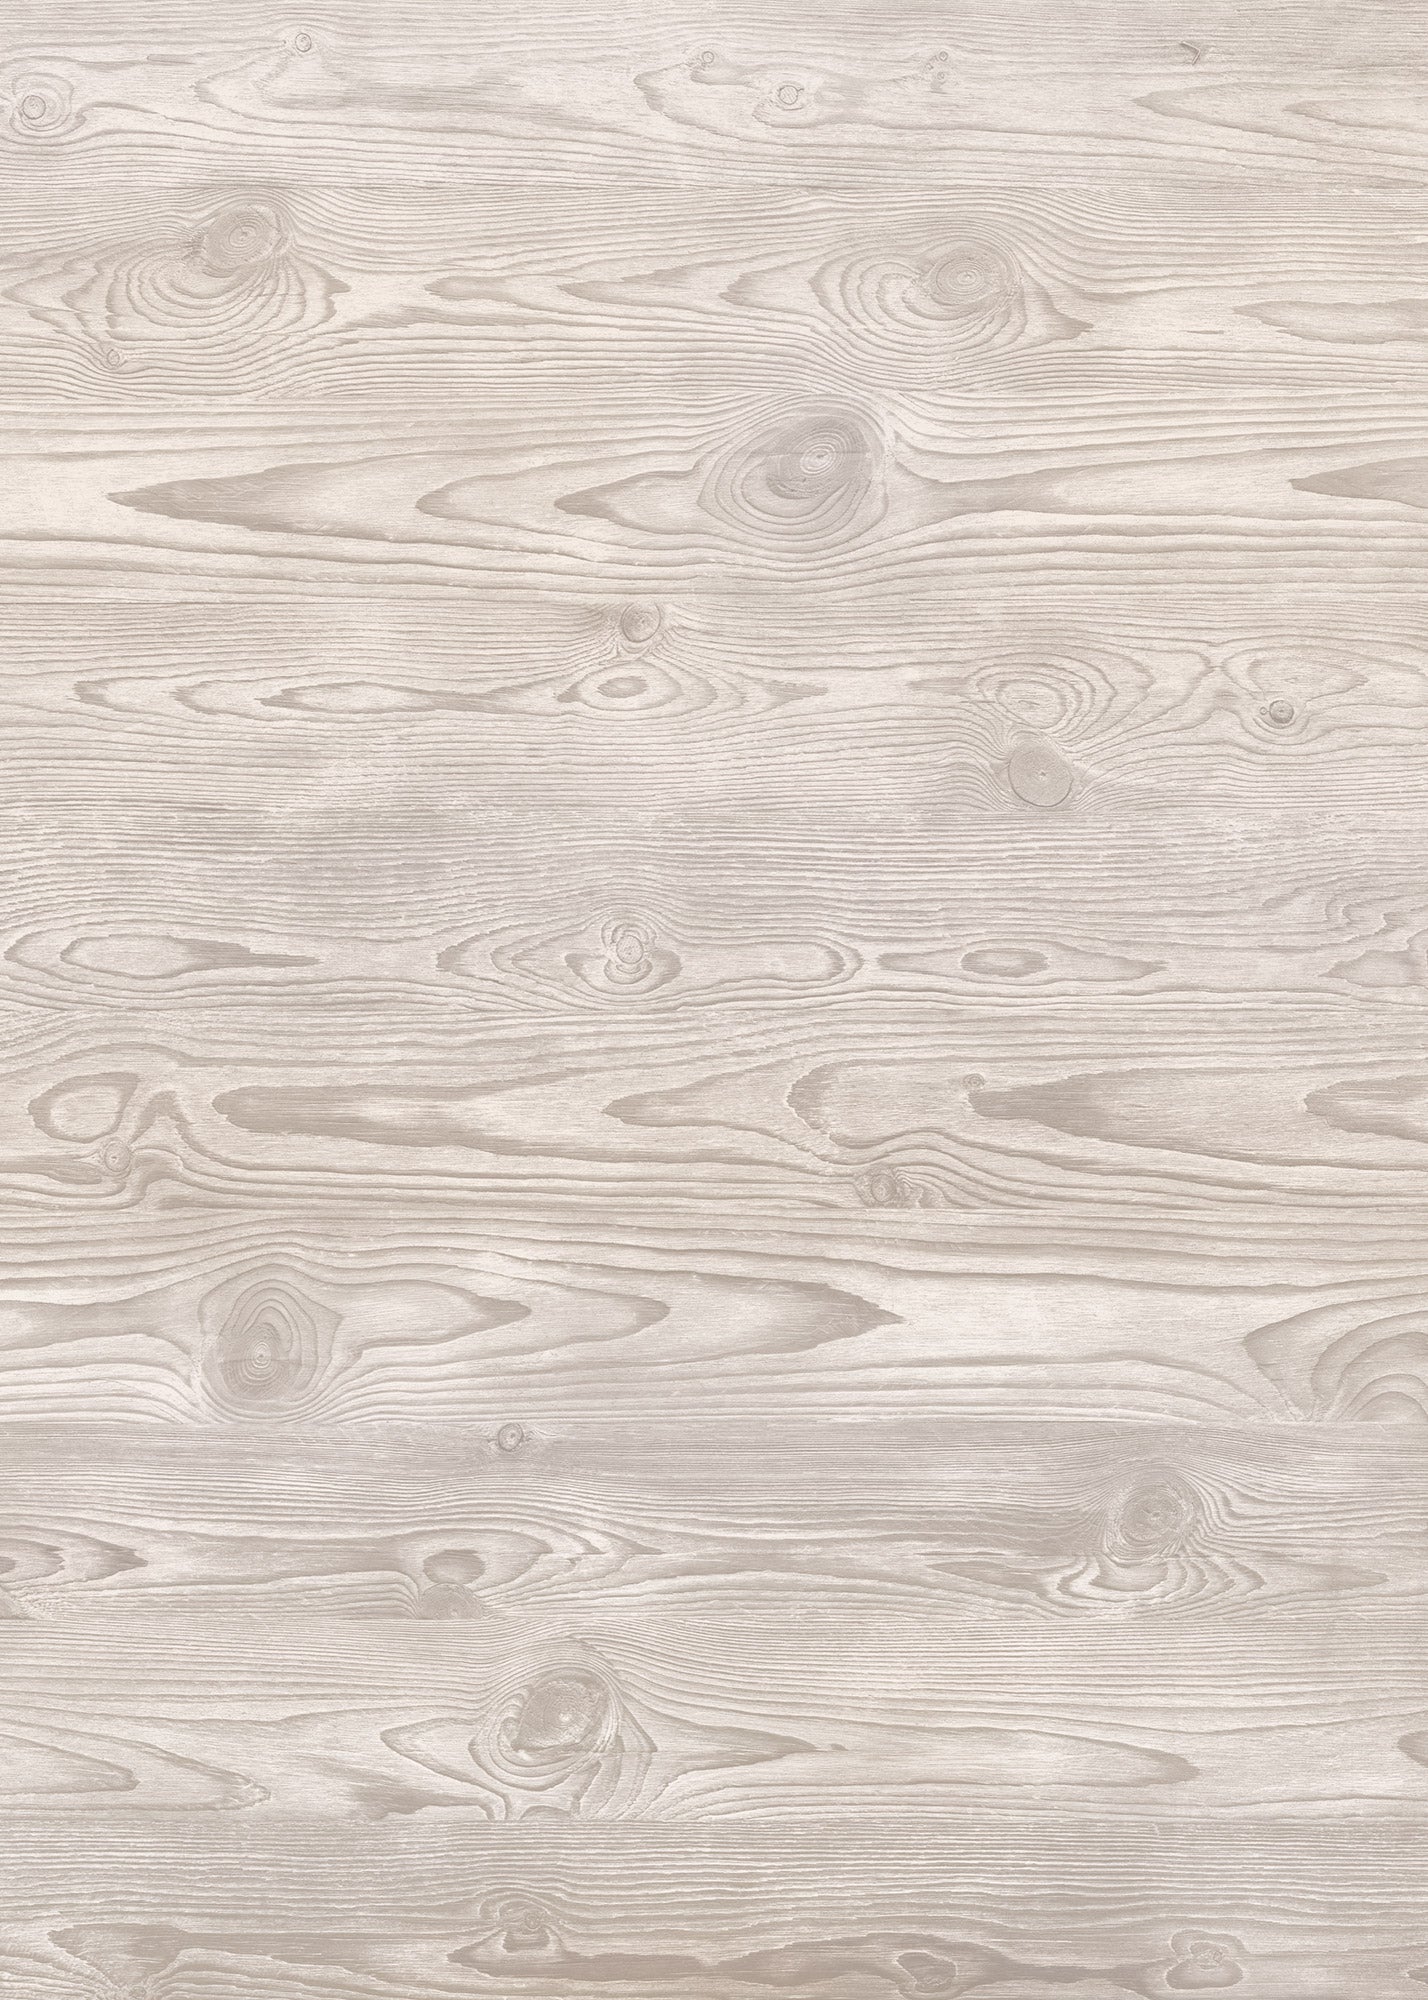 Ghost Wood Large Vinyl Photography Backdrop by Club Backdrops